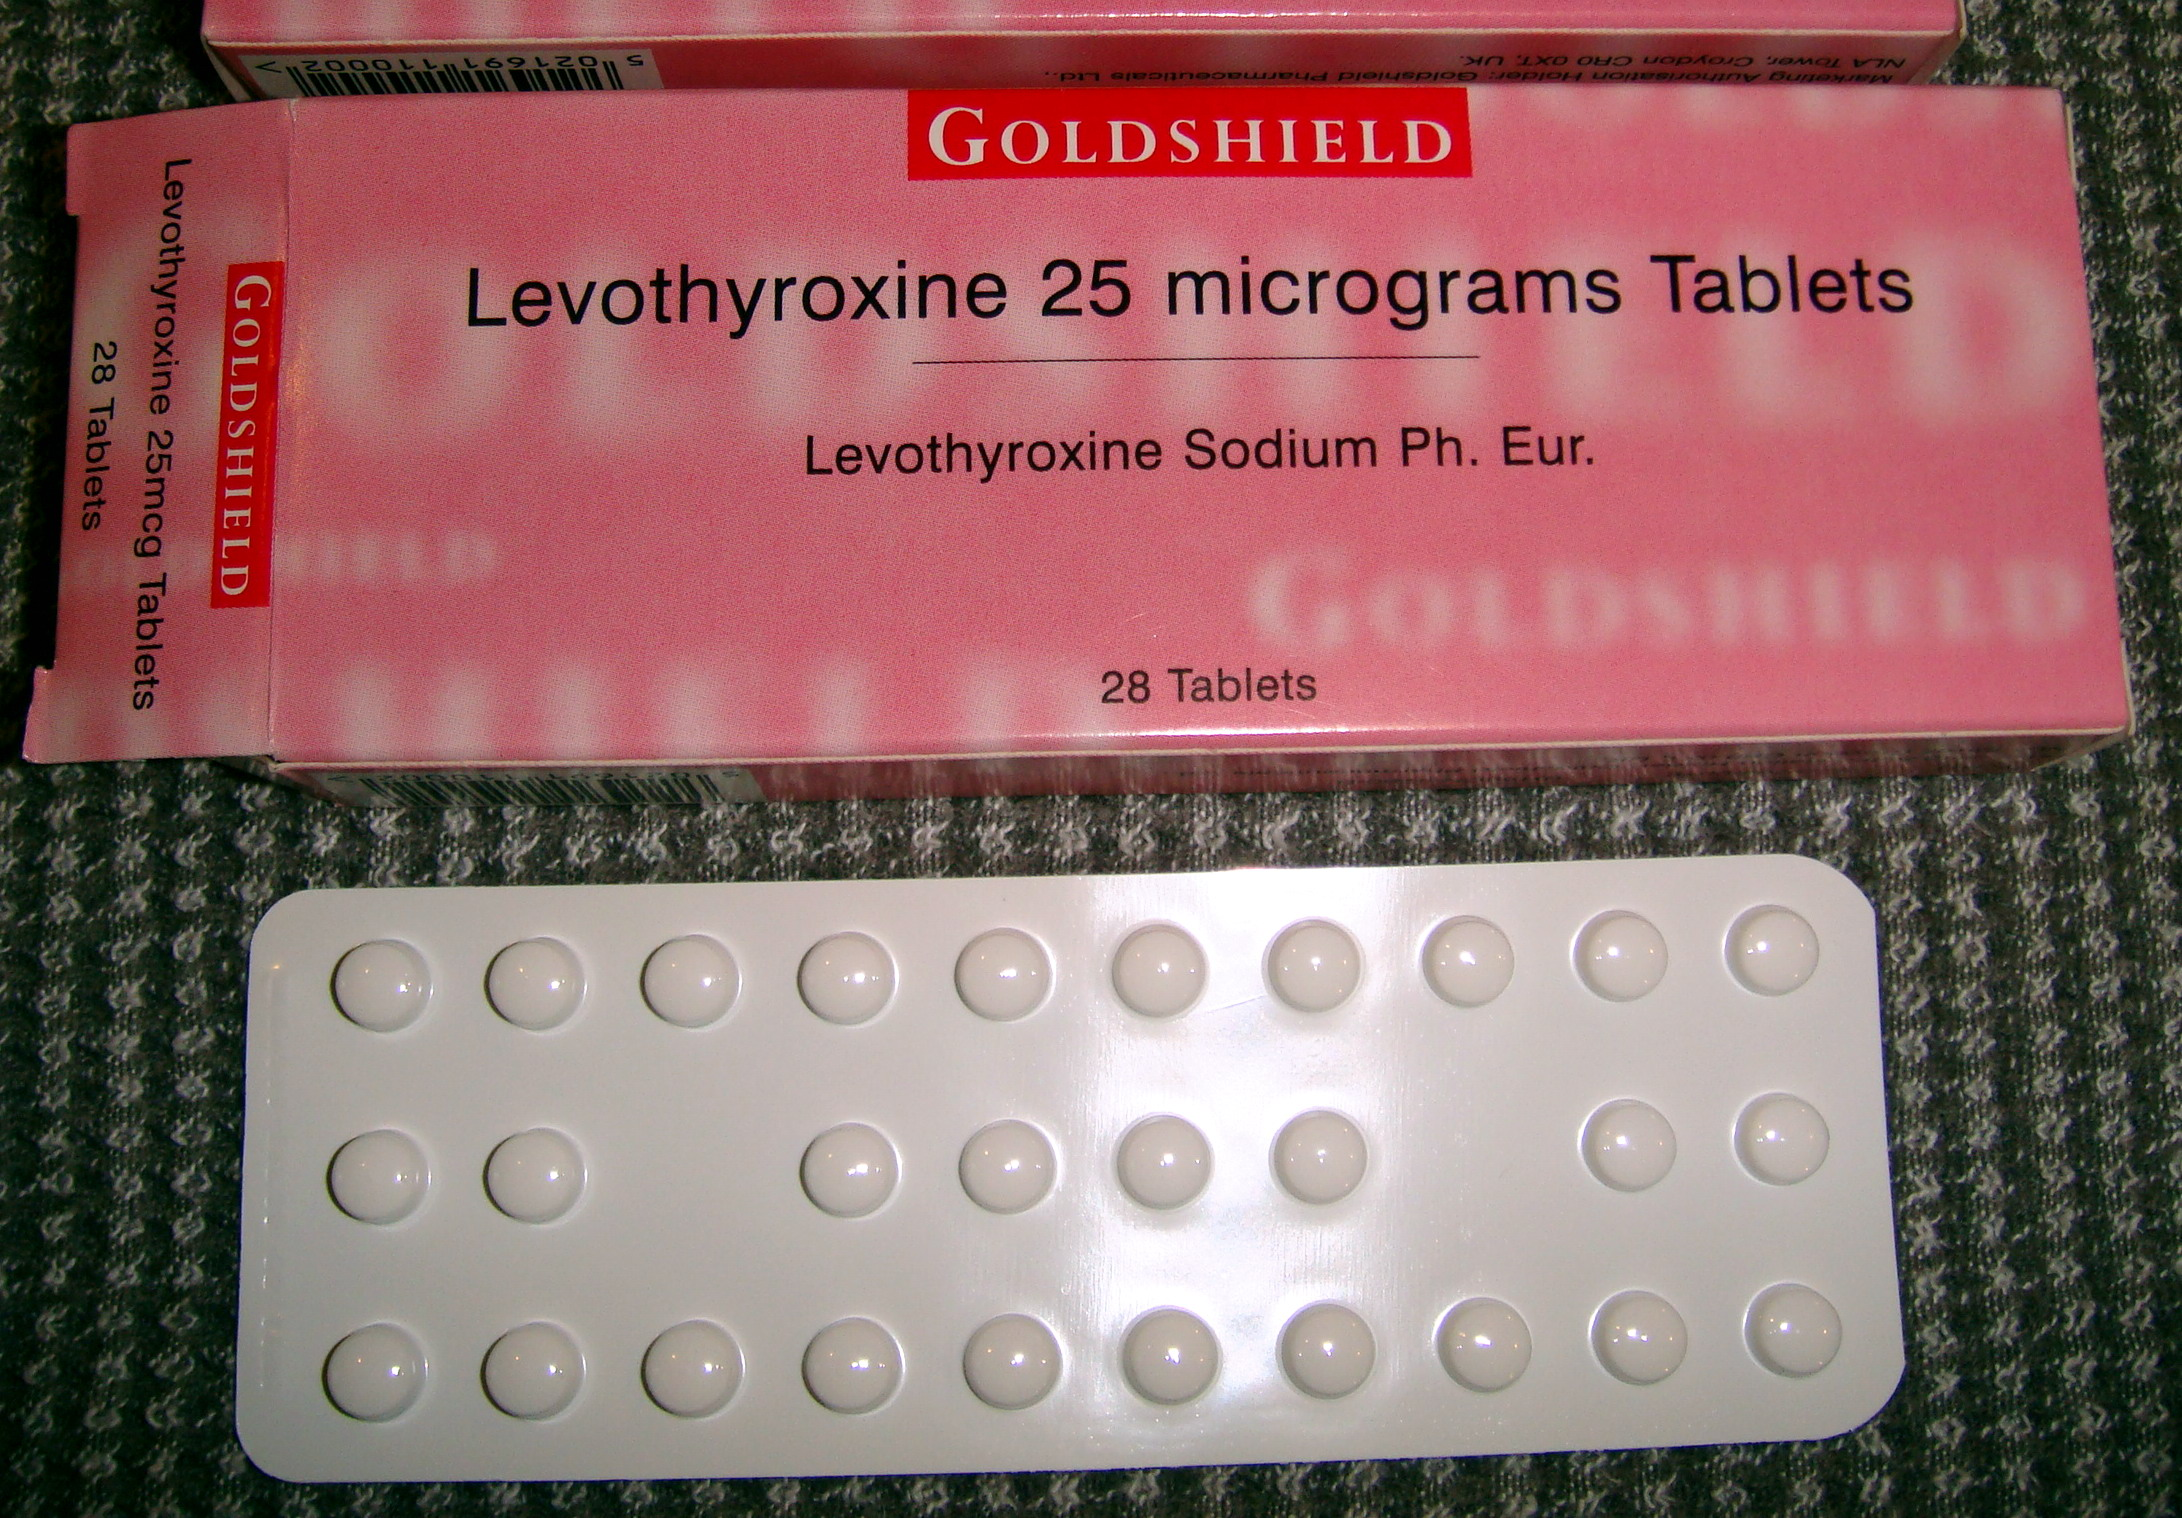 Photo showing closeup of open Levothyroxine package with blister pack beside it.